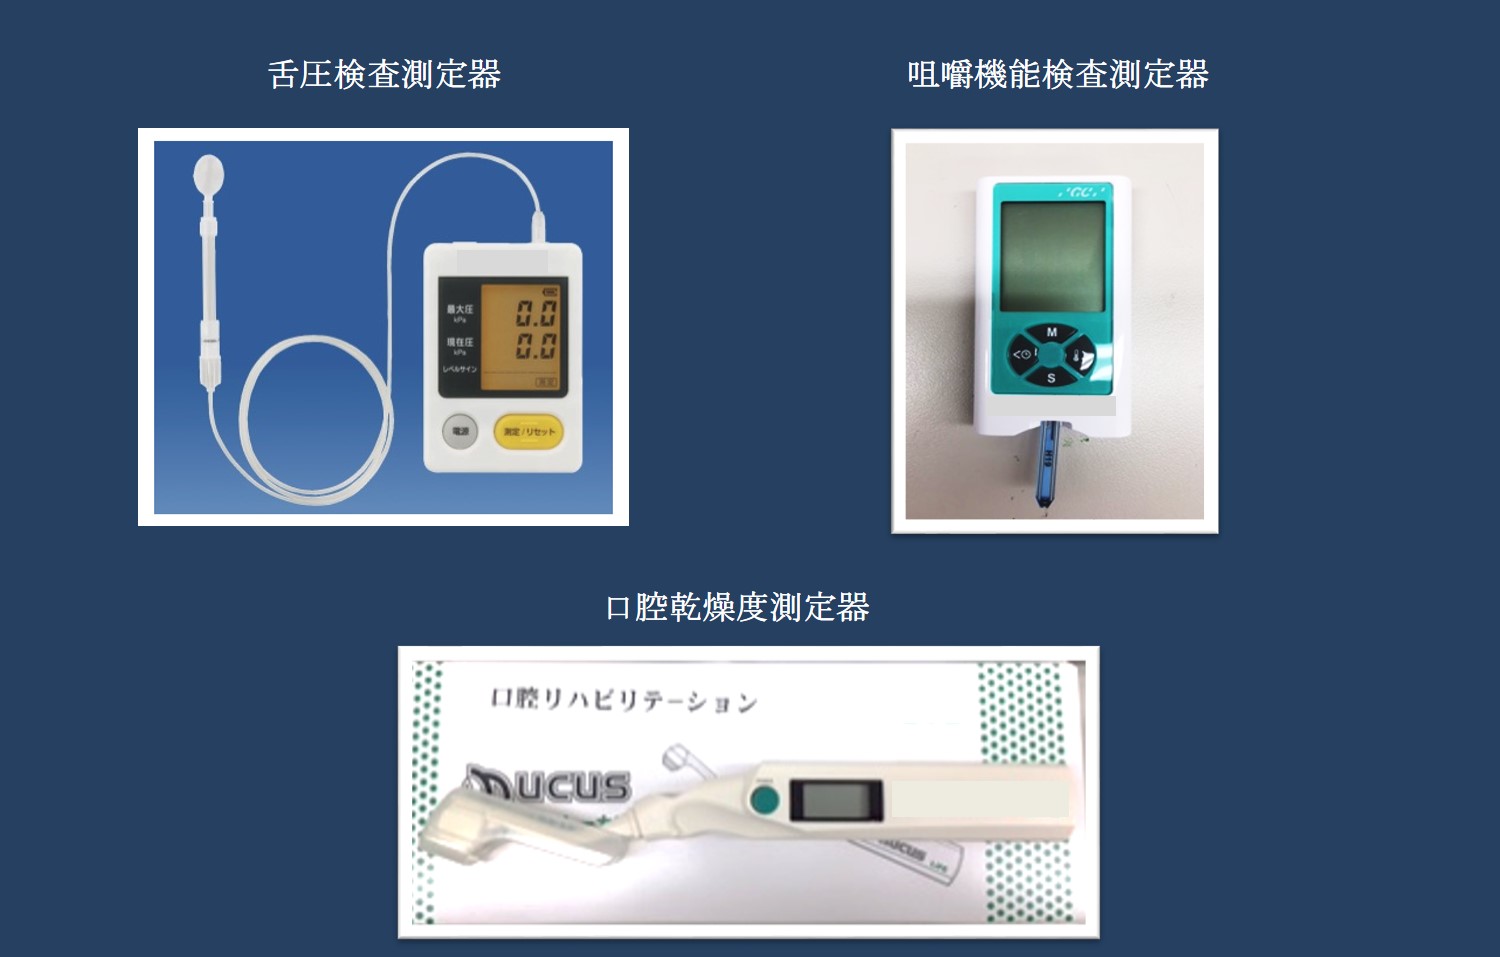 JMS tongue pressure measurement device. This device consists of a)